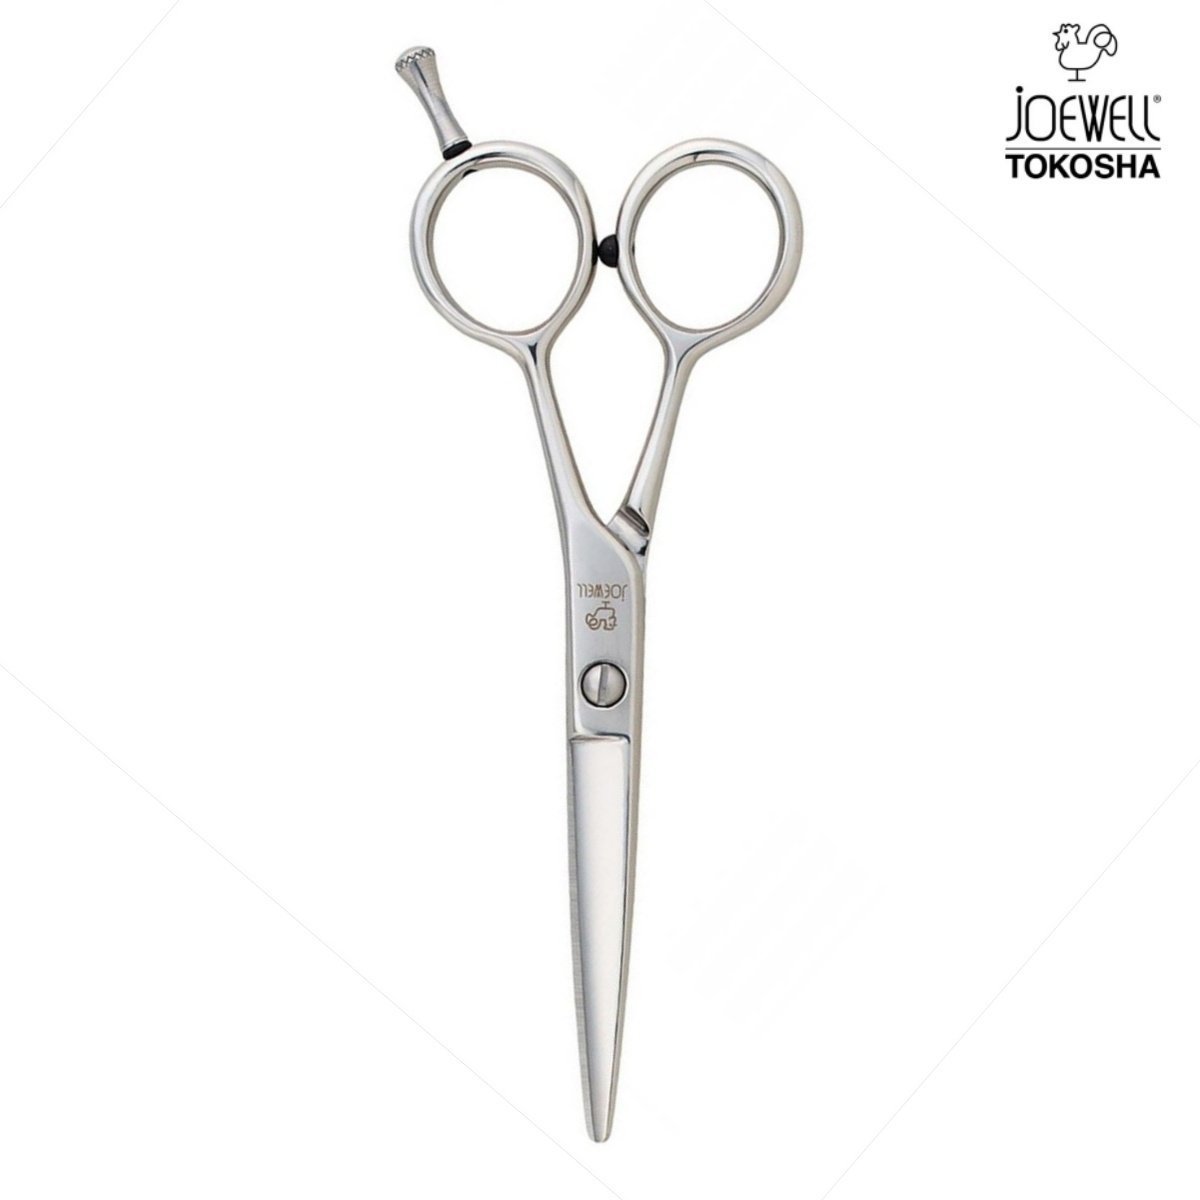 Above Finesse X Hair Cutting Shears - 5.5